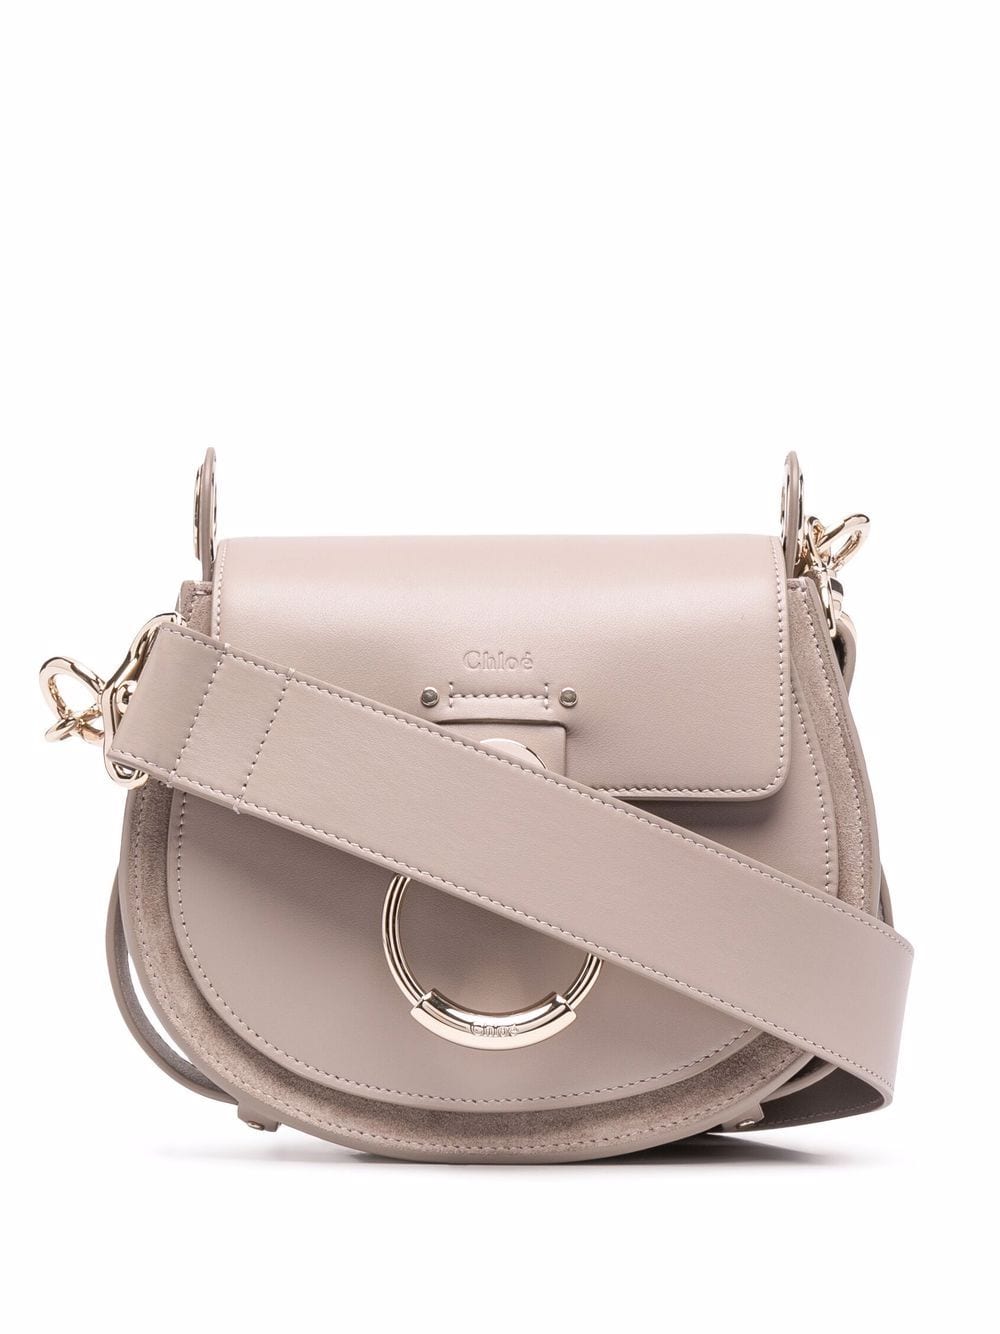 CHLOÉ Stone Grey Small Tess Leather Crossbody Bag with Ring Detail and Detachable Strap